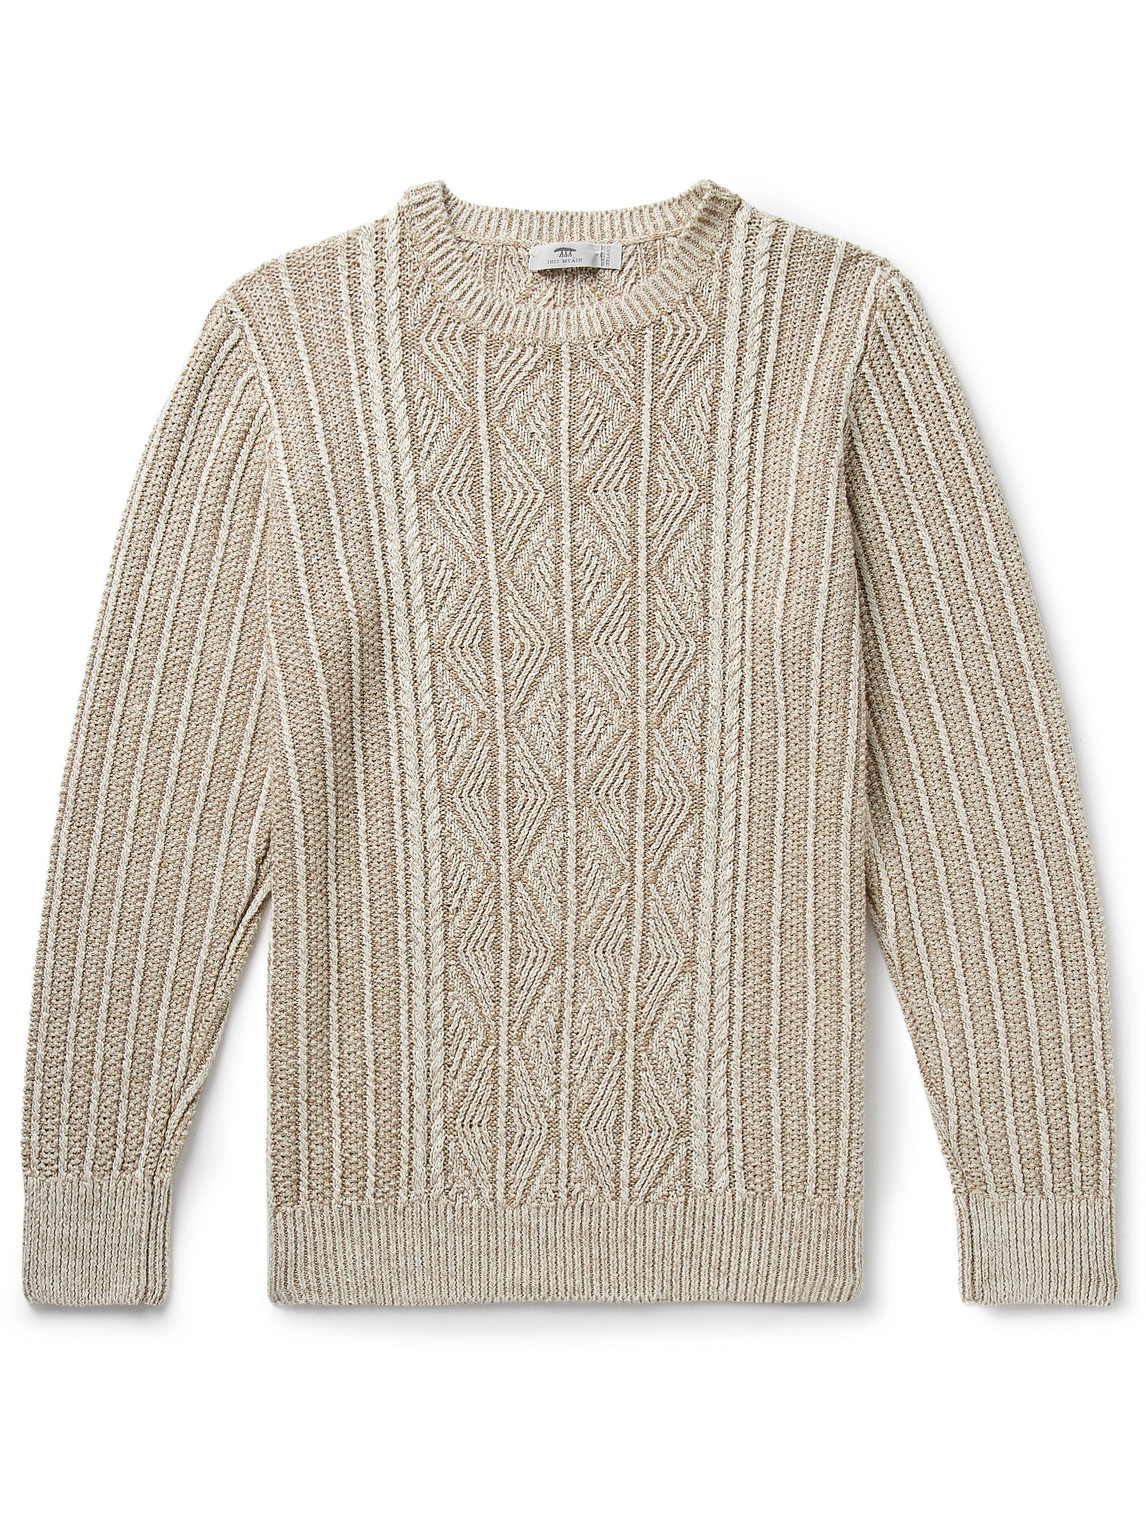 Inis Meain Aran Cable-knit Linen Sweater In Neutrals